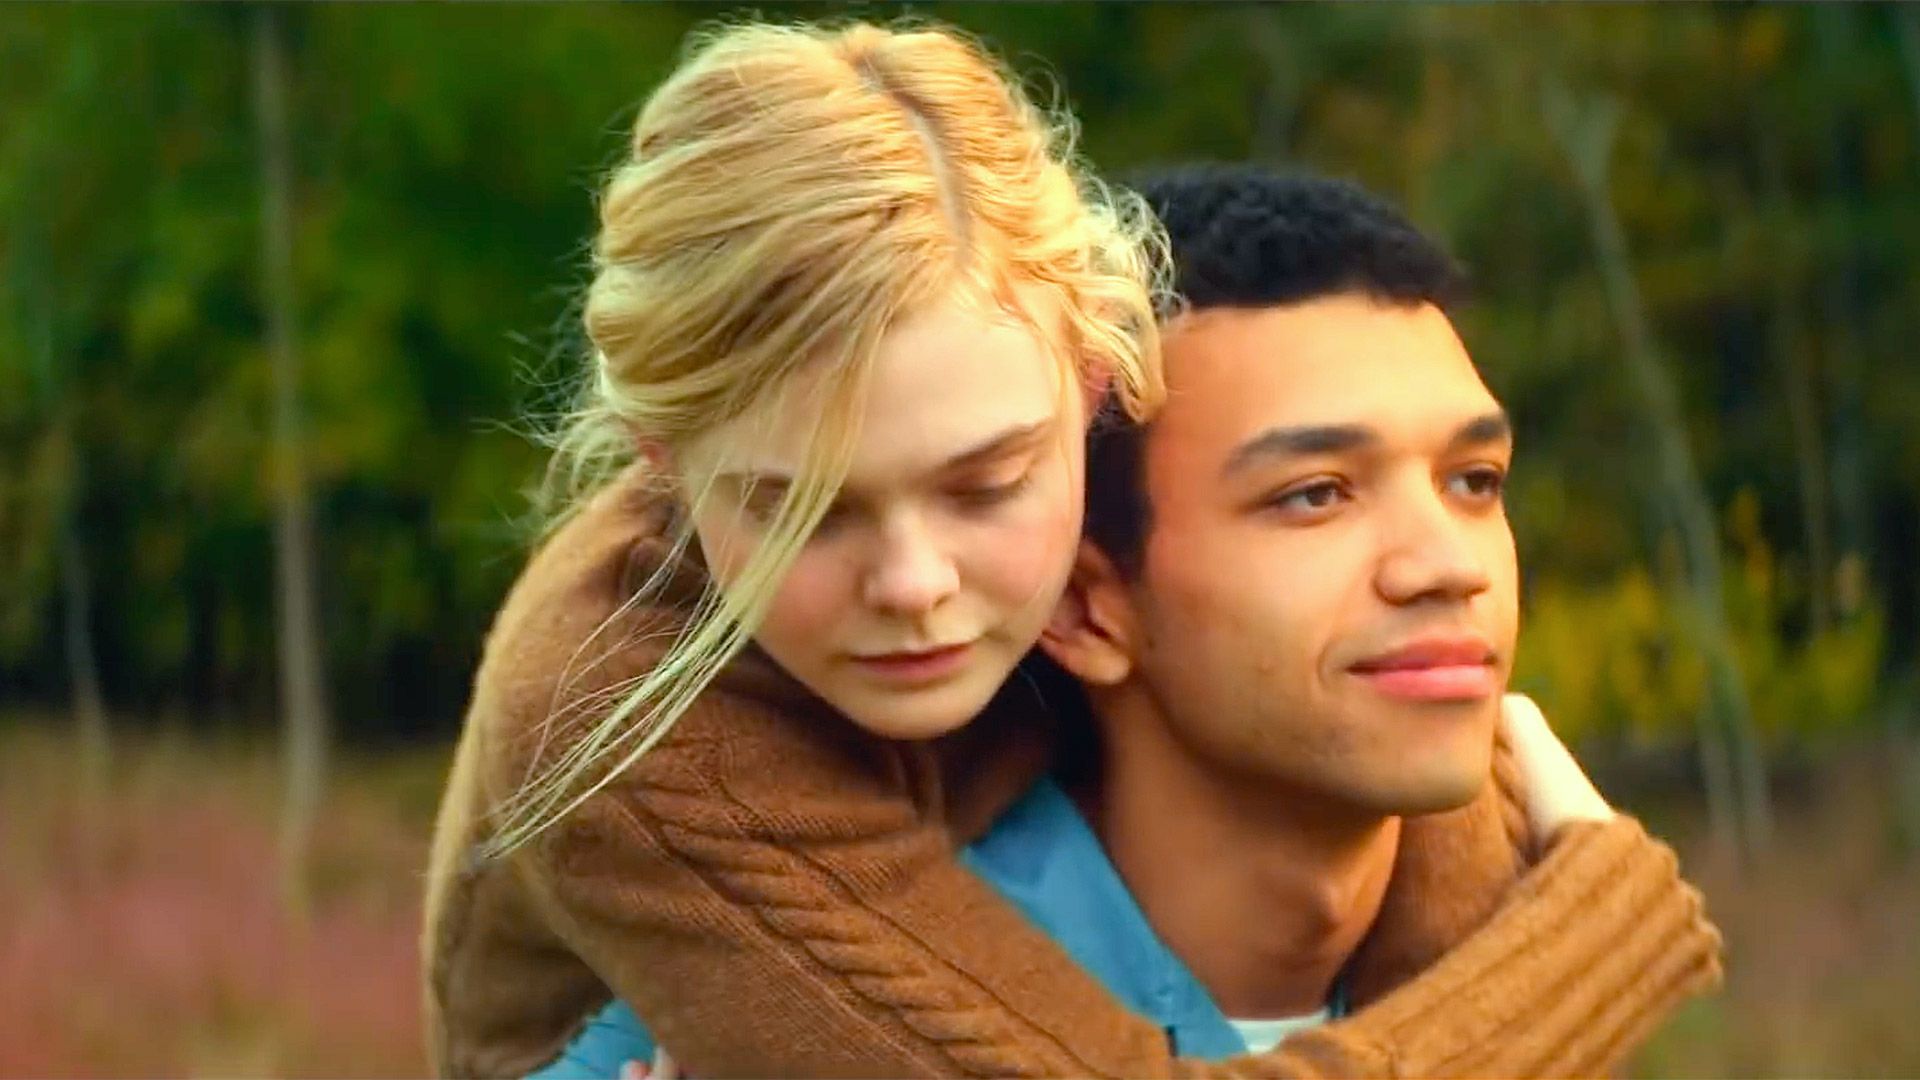 All The Bright Places On Netflix. CypriumNews. Film aesthetic, Elle fanning, Movies